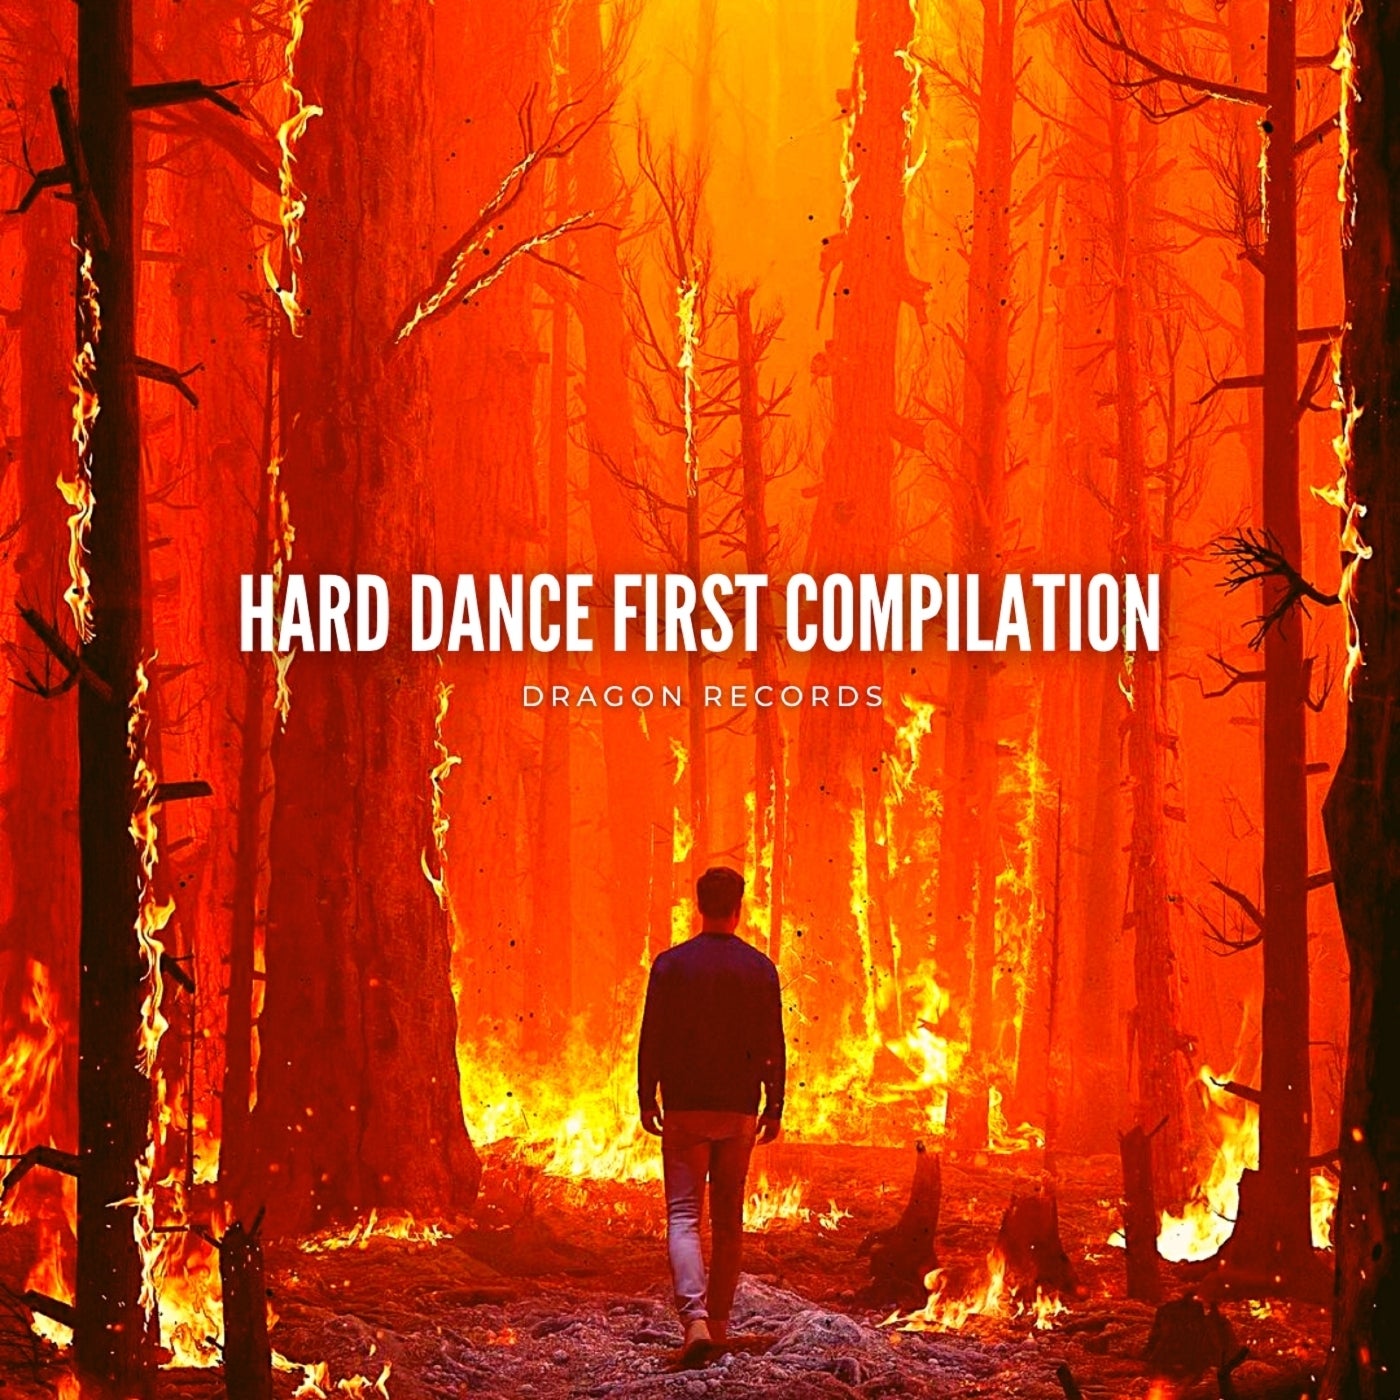 Hard Dance First Compilation